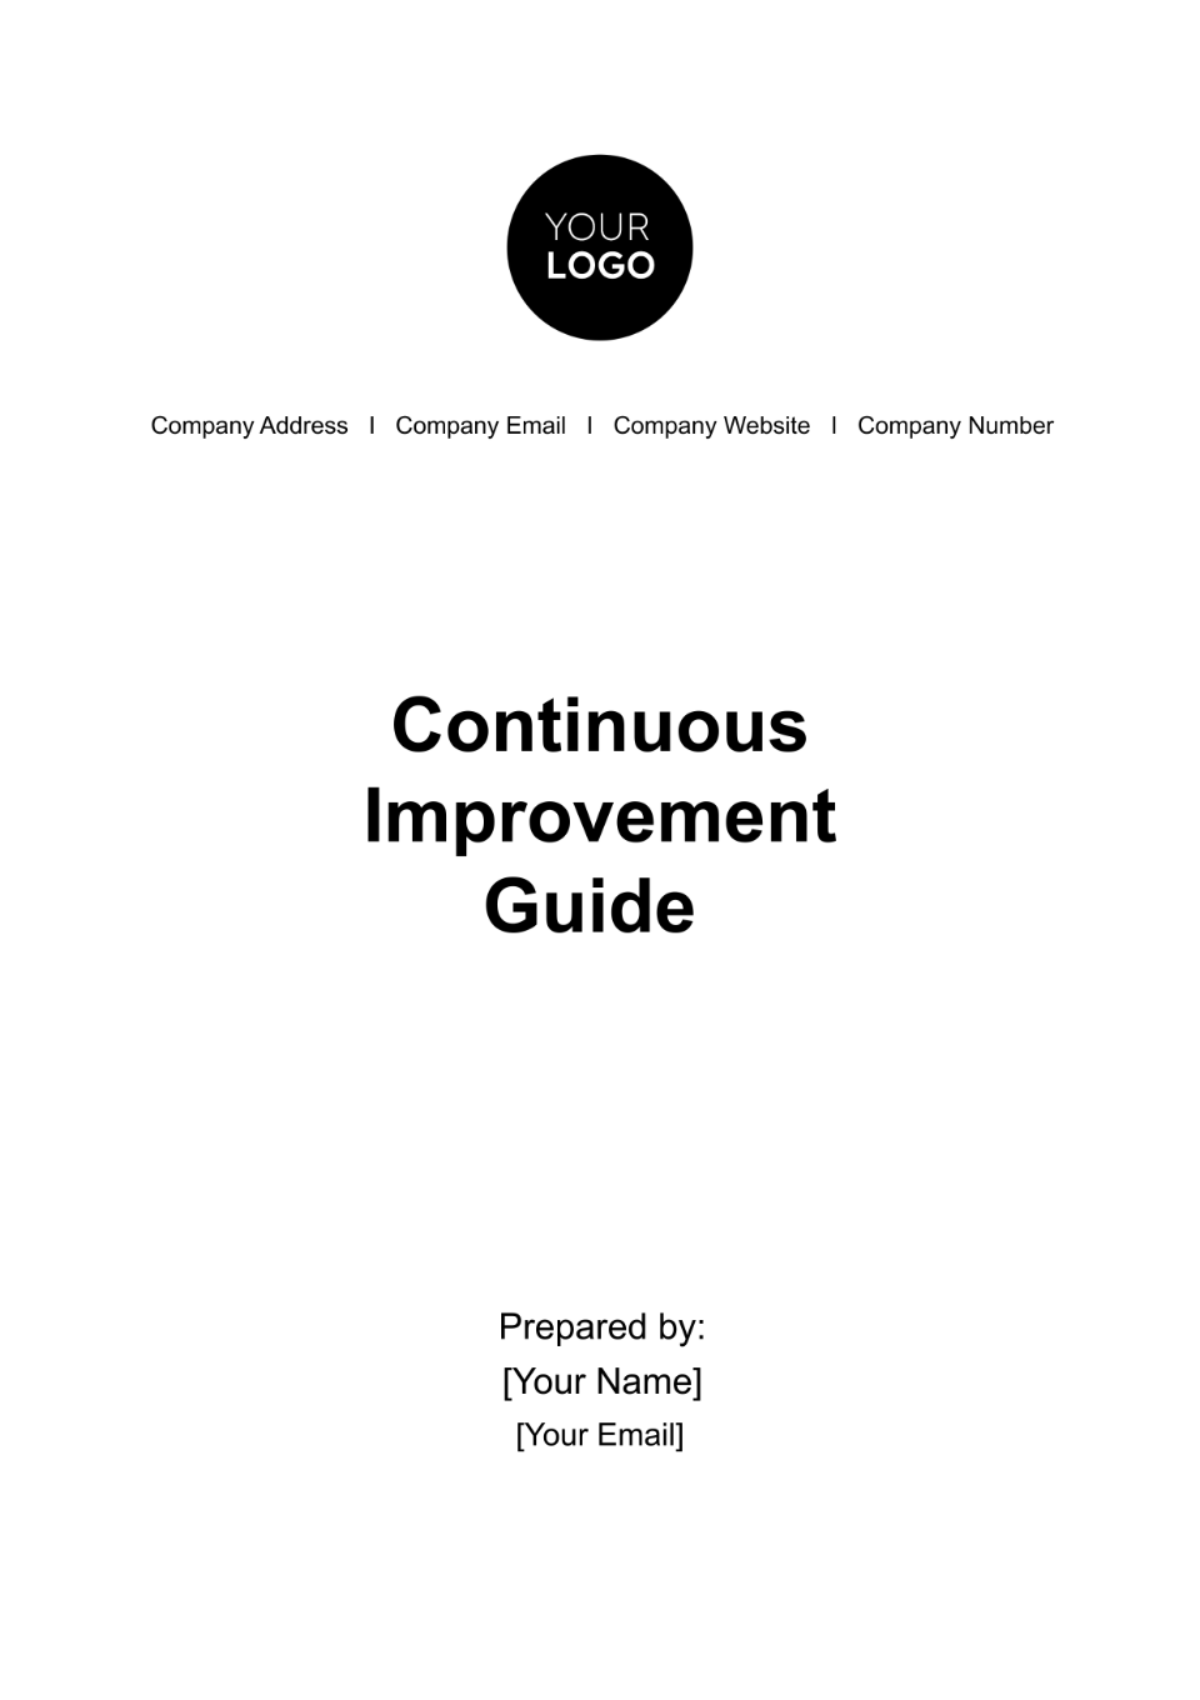 Free Continuous Improvement Guide HR Template